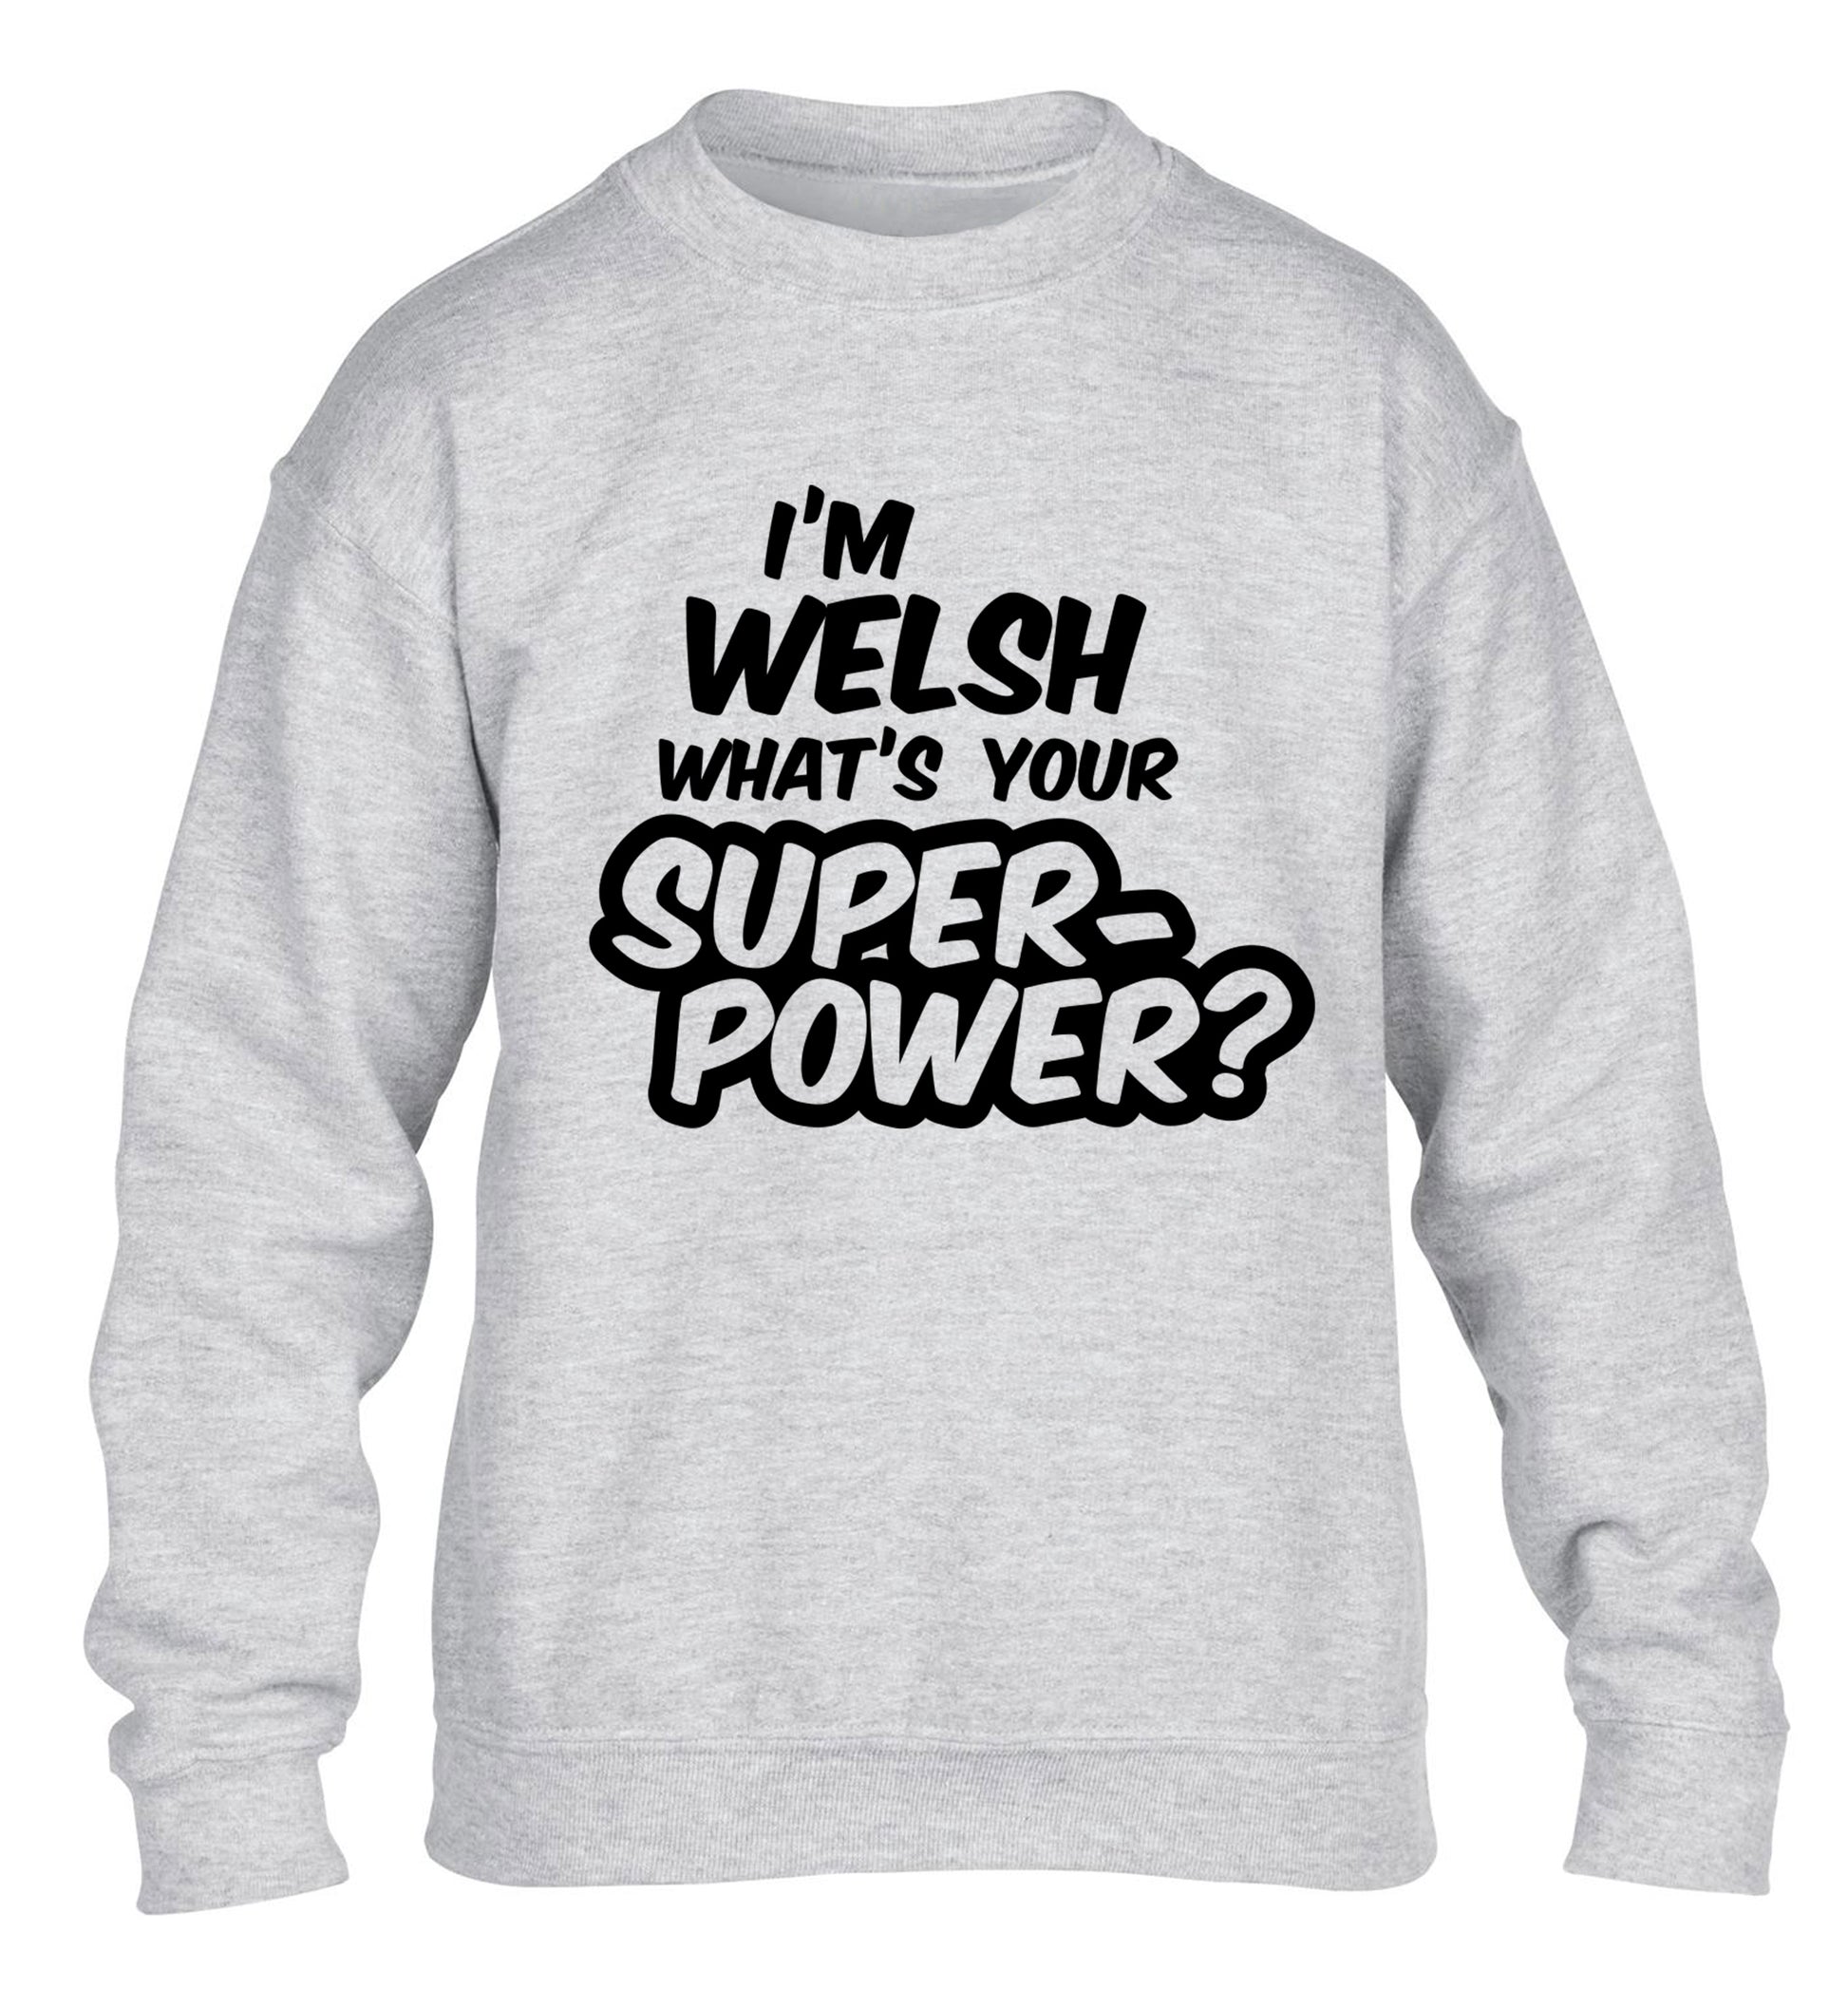 I'm Welsh what's your superpower? children's grey sweater 12-13 Years